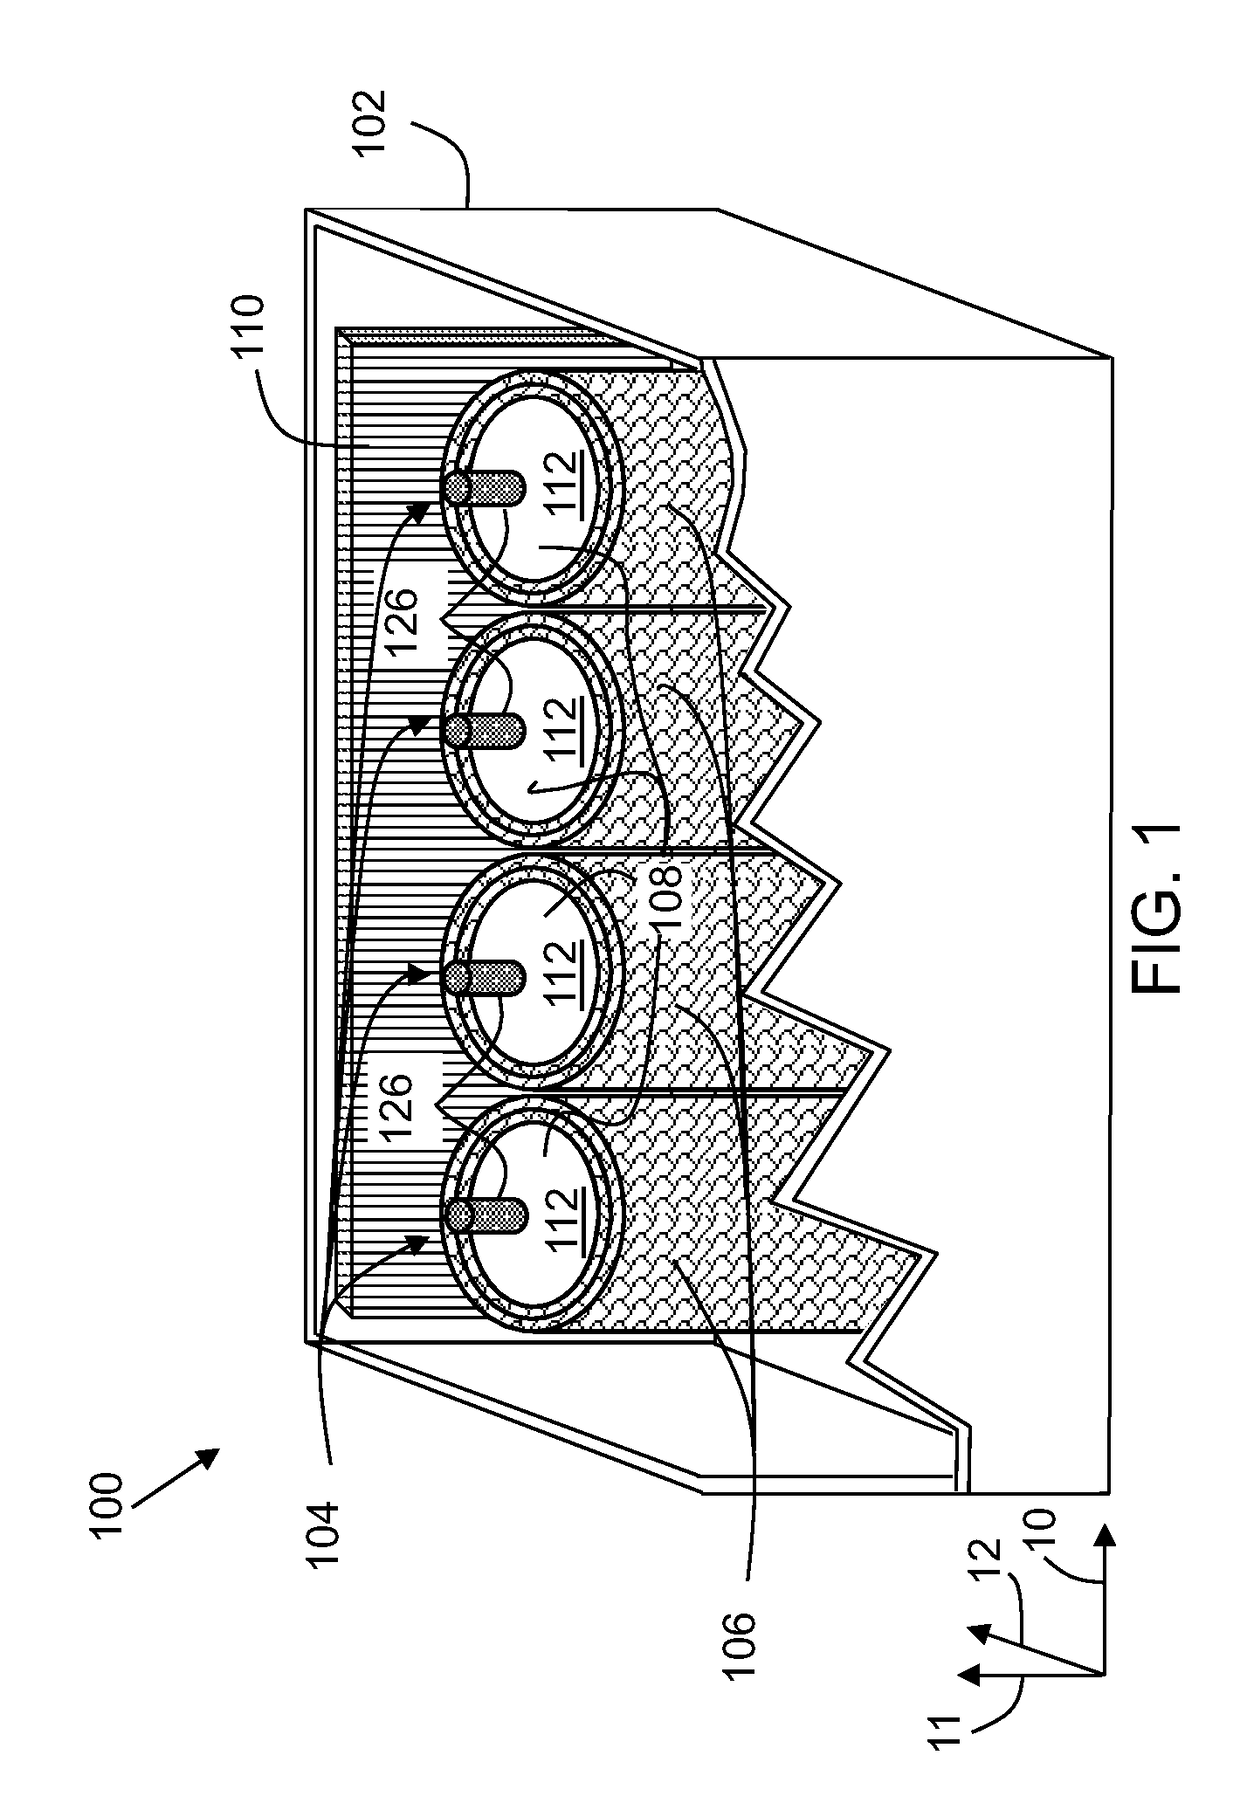 Capacitor assembly and related method of forming